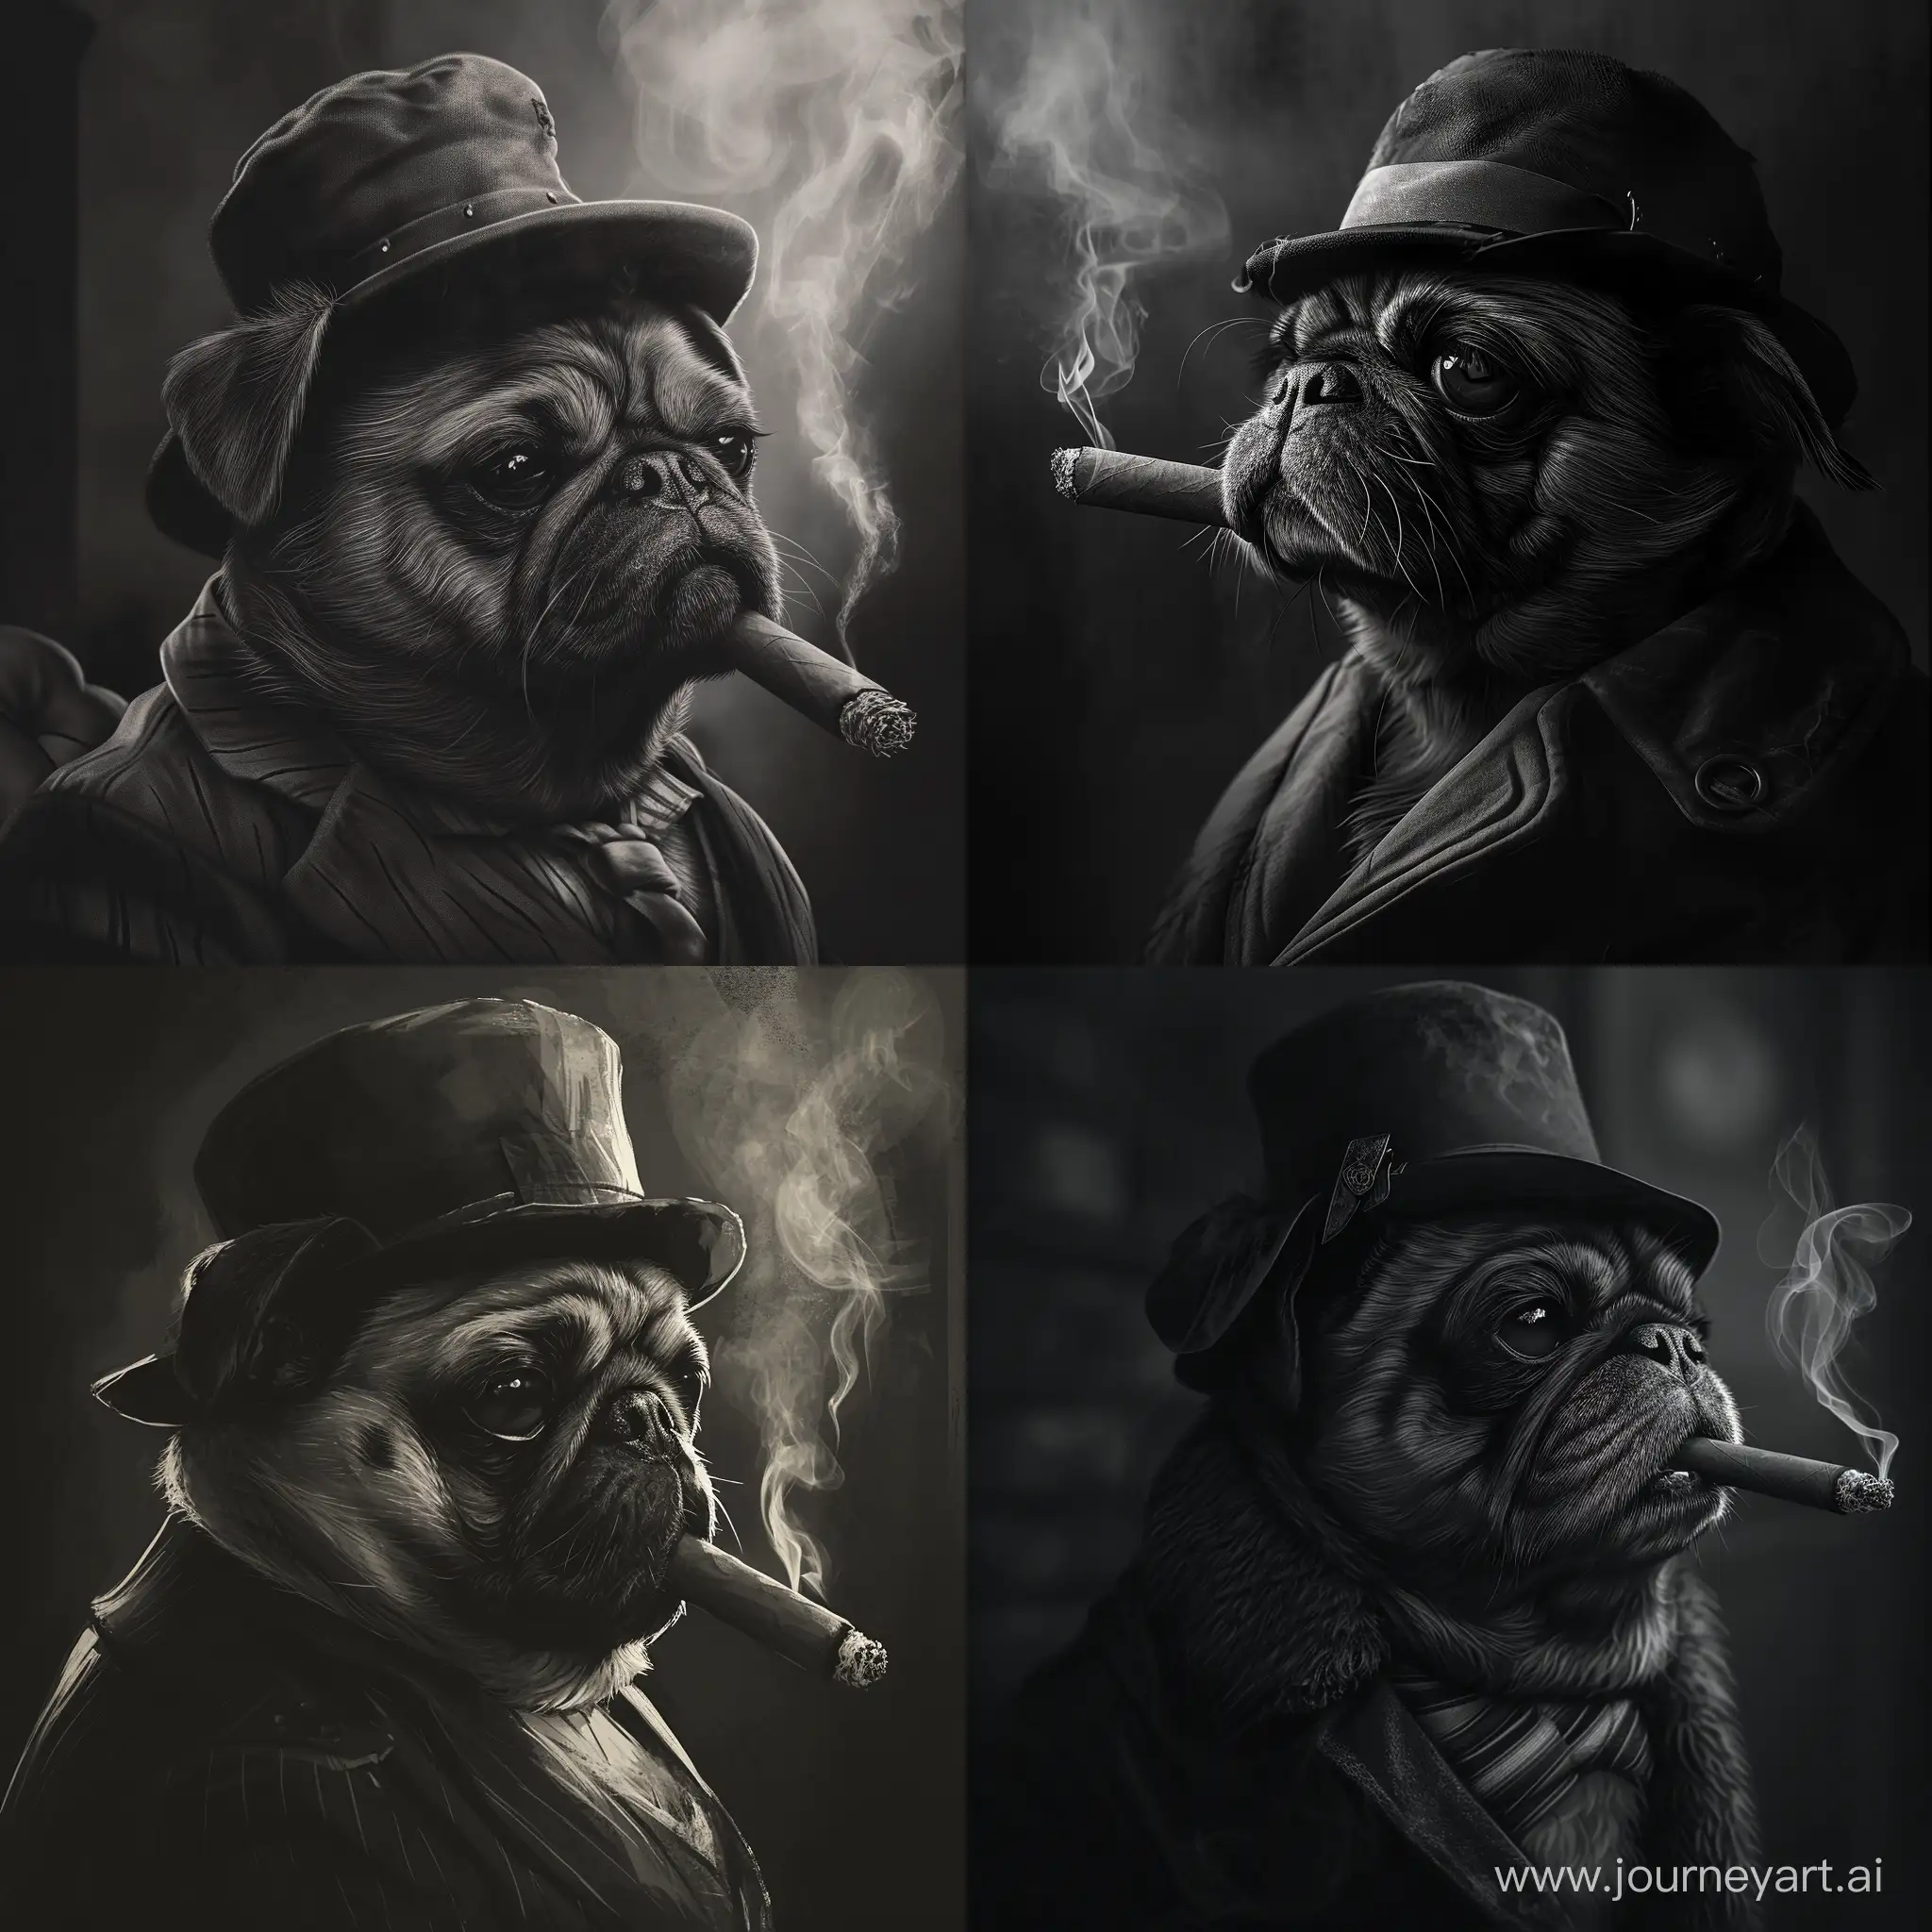 a medium quality digital painting of a Pug gangster from the 1920s, smoking a cigar, black and white, vintage, cigarette smoke, moody lighting, retro vibes, 4k resolution